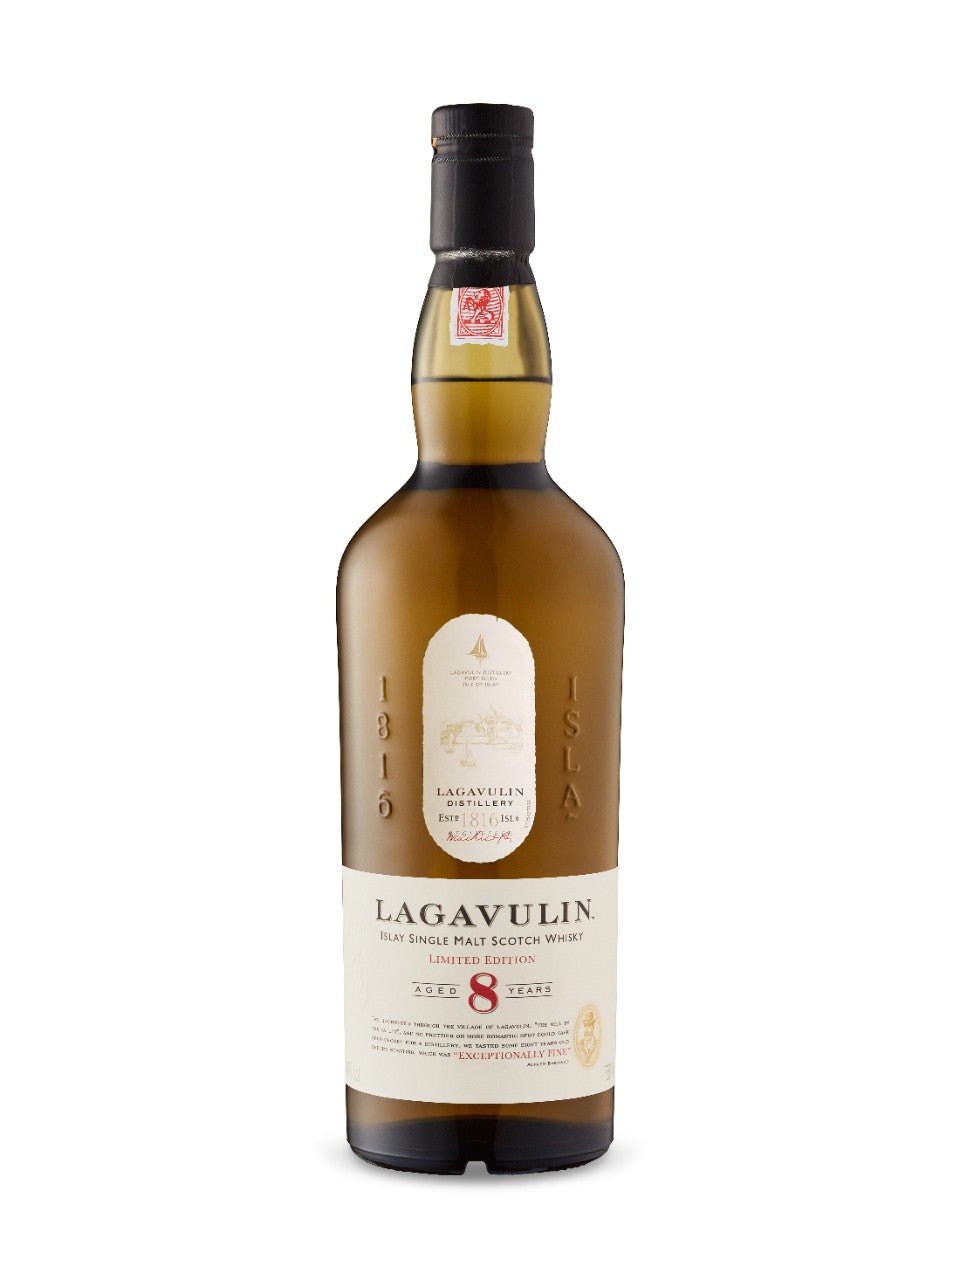 Lagavulin 8 Year Old Islay Single Malt Scotch Whisky | Exquisite Wine & Alcohol Gift Delivery Toronto Canada | Vyno